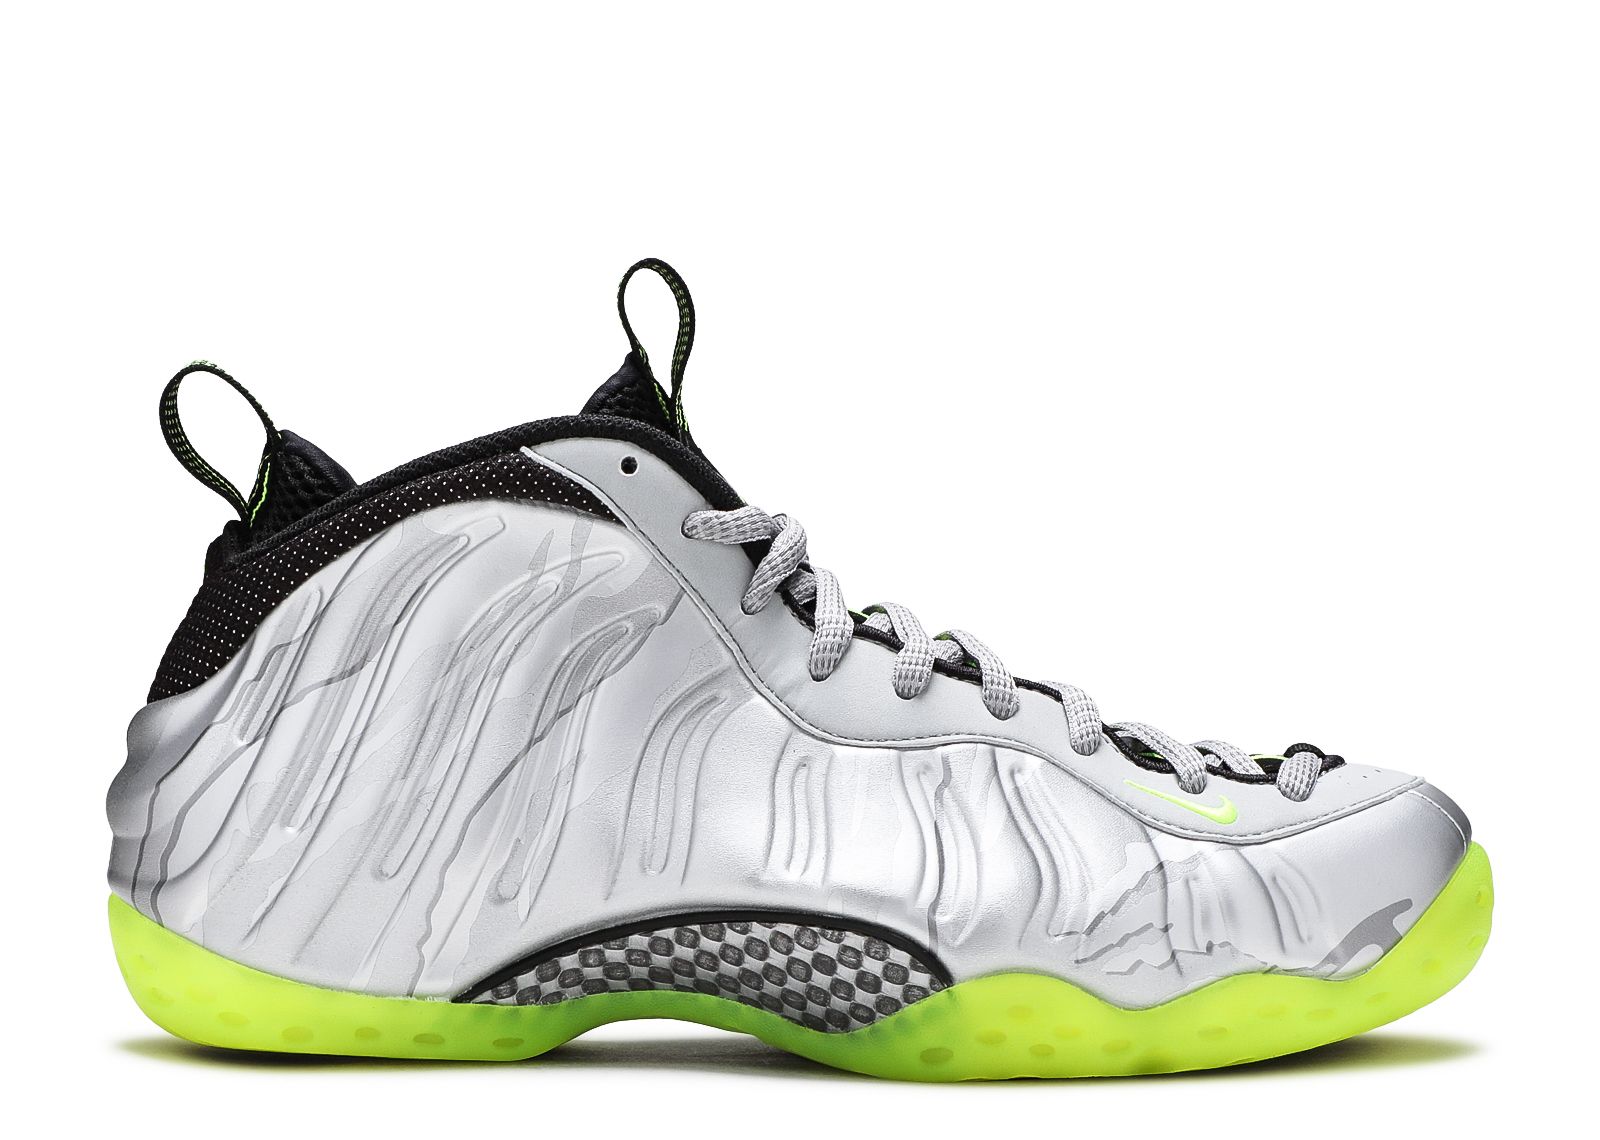 Nike's Last Foamposite Release of the Year Sole Collector